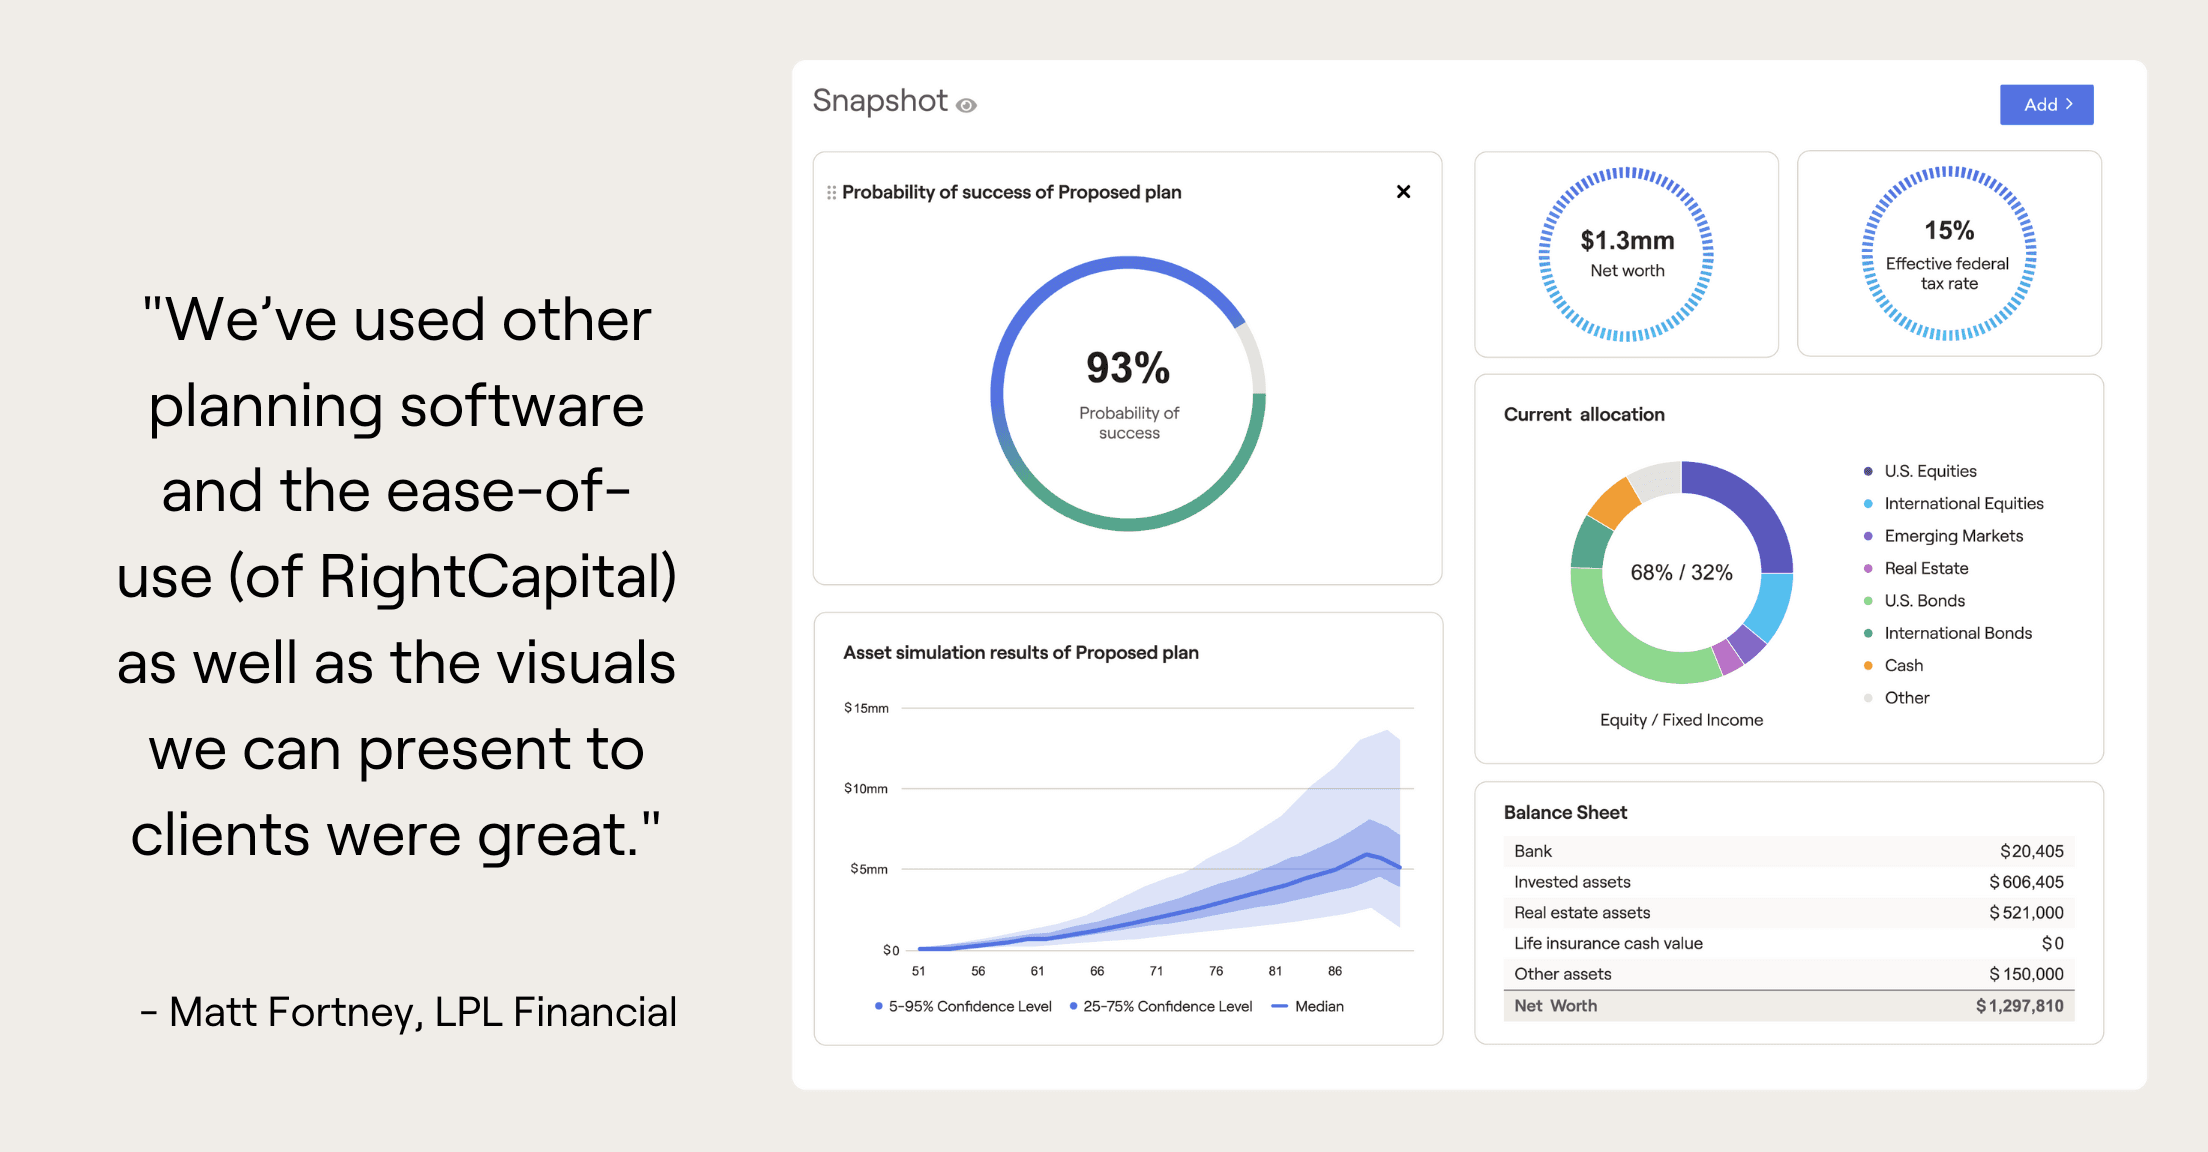 Screenshot of RightCapital Snapshot with quote "We've used other planning software and the ease-of-use (of RightCapital) as well as the visuals we can present to the clients were great."